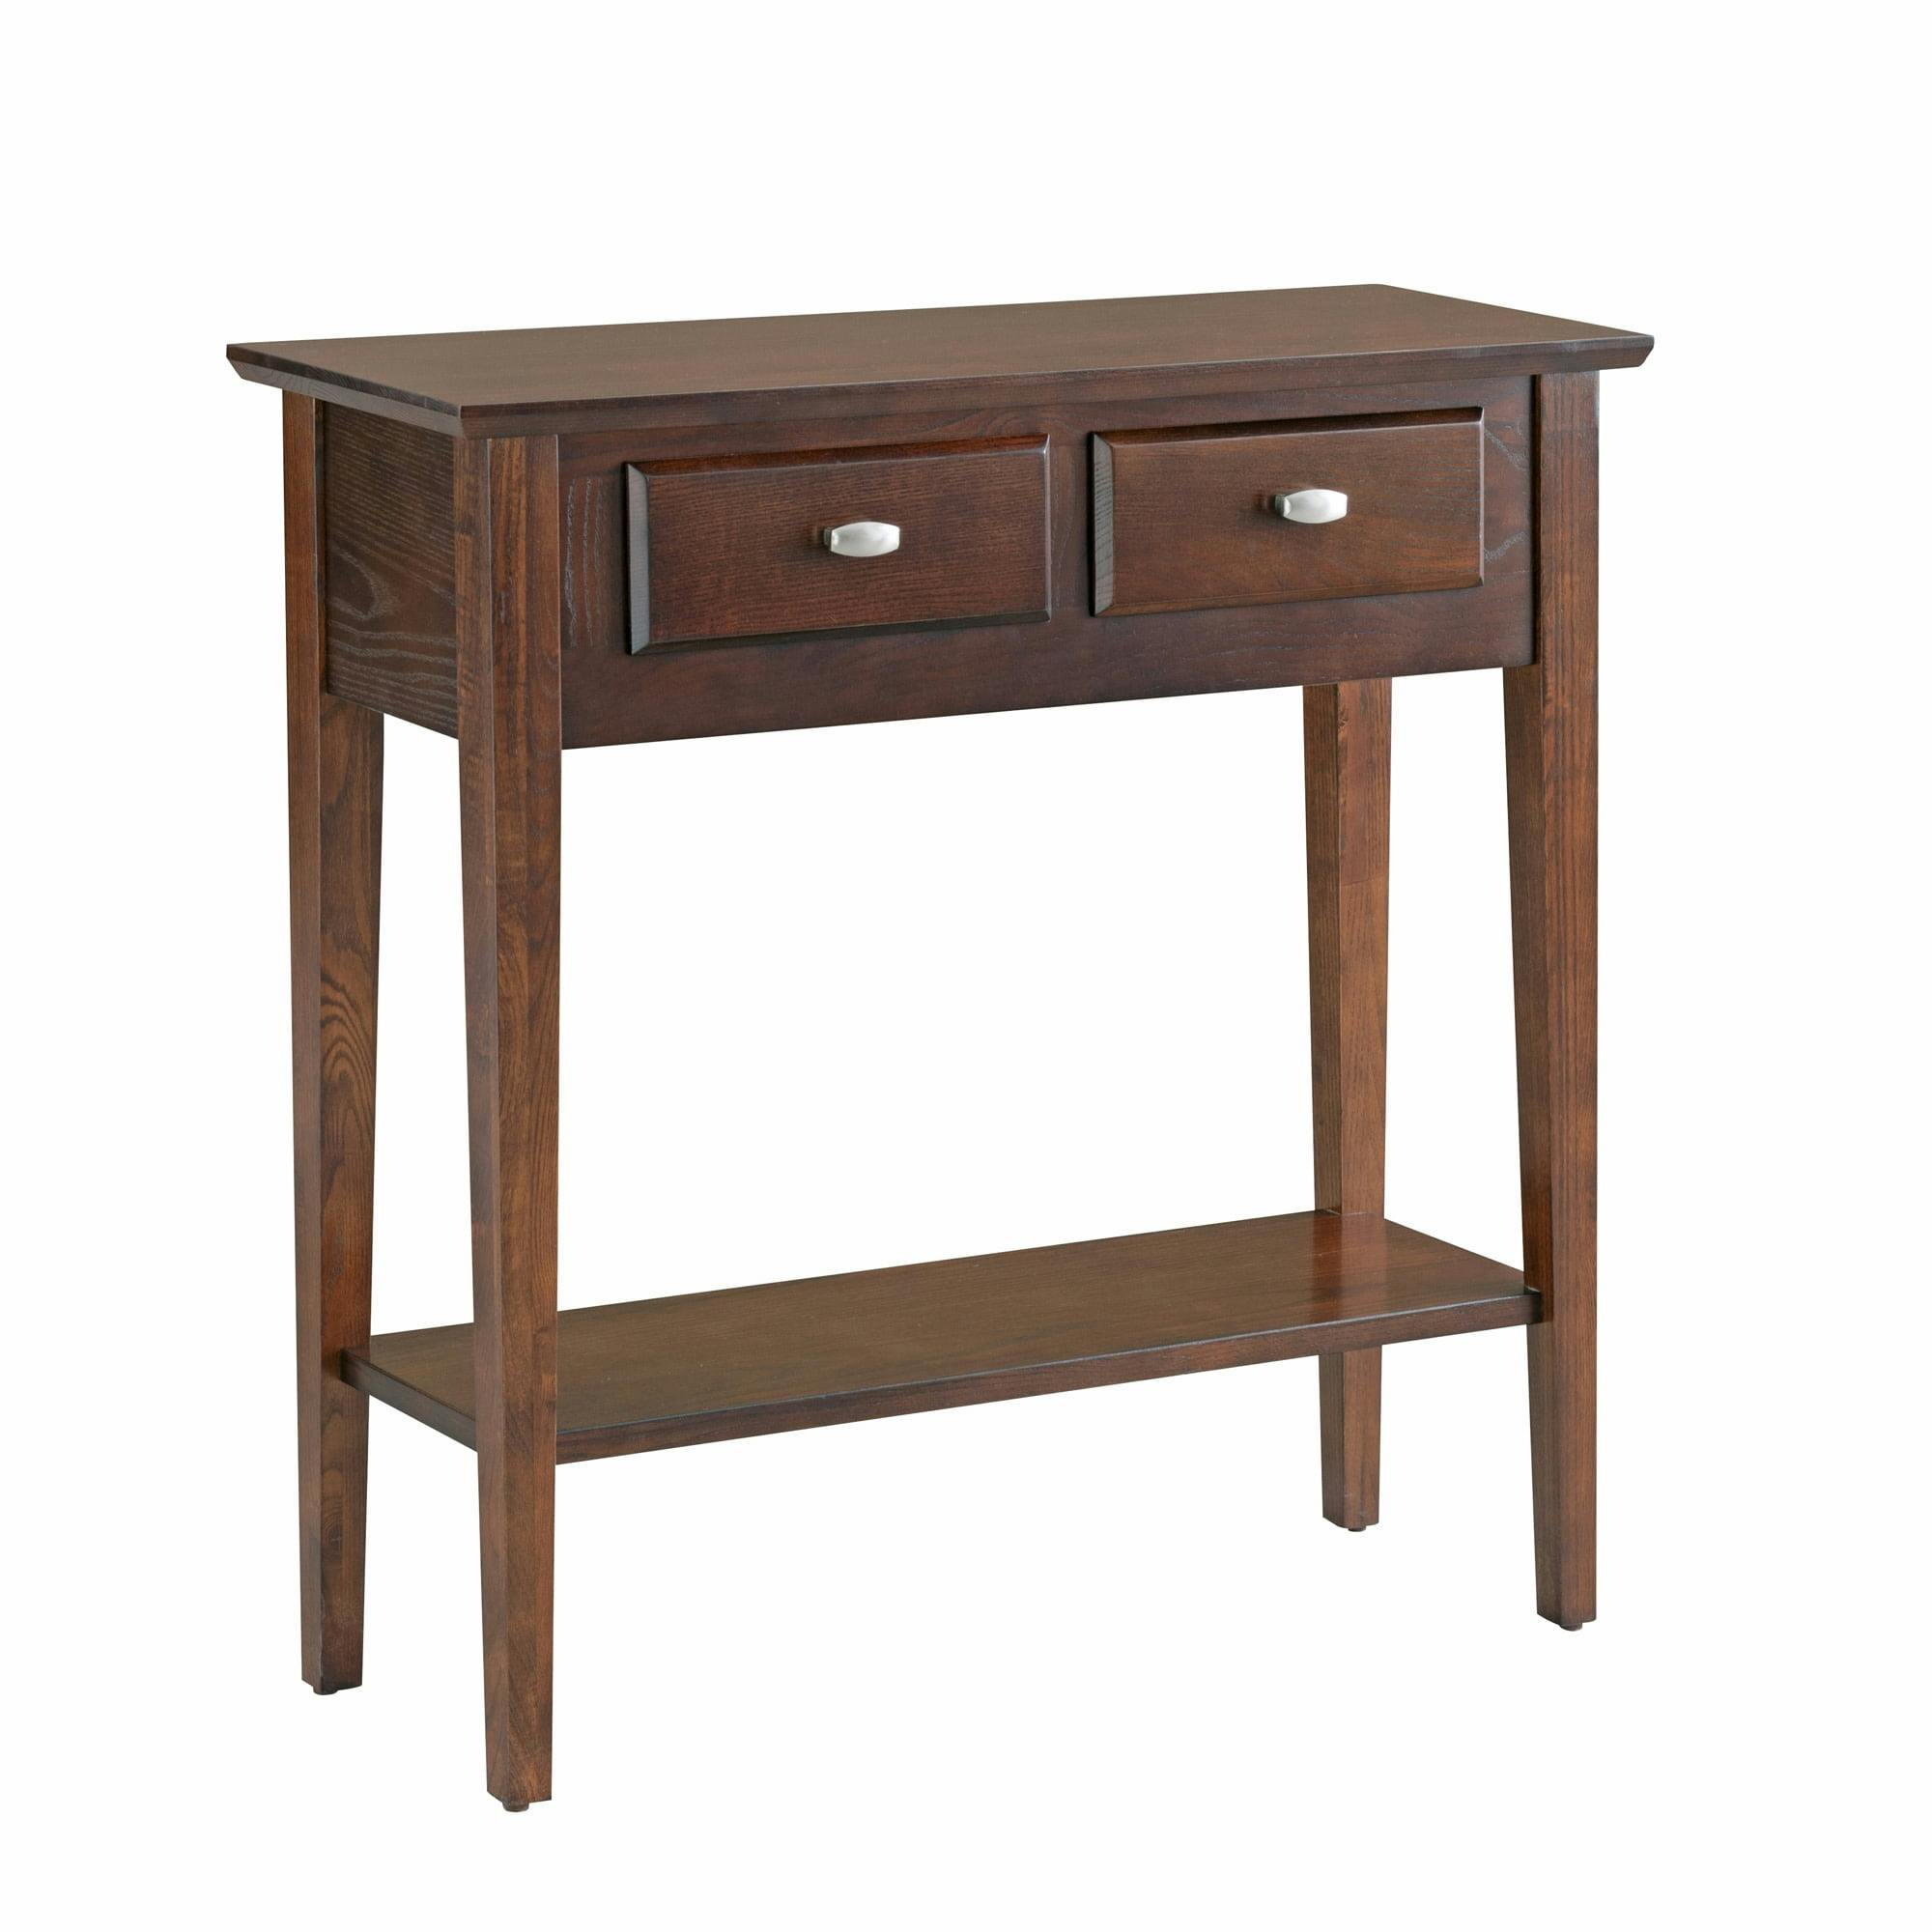 Chocolate Oak Slim Hall Console Table with Storage